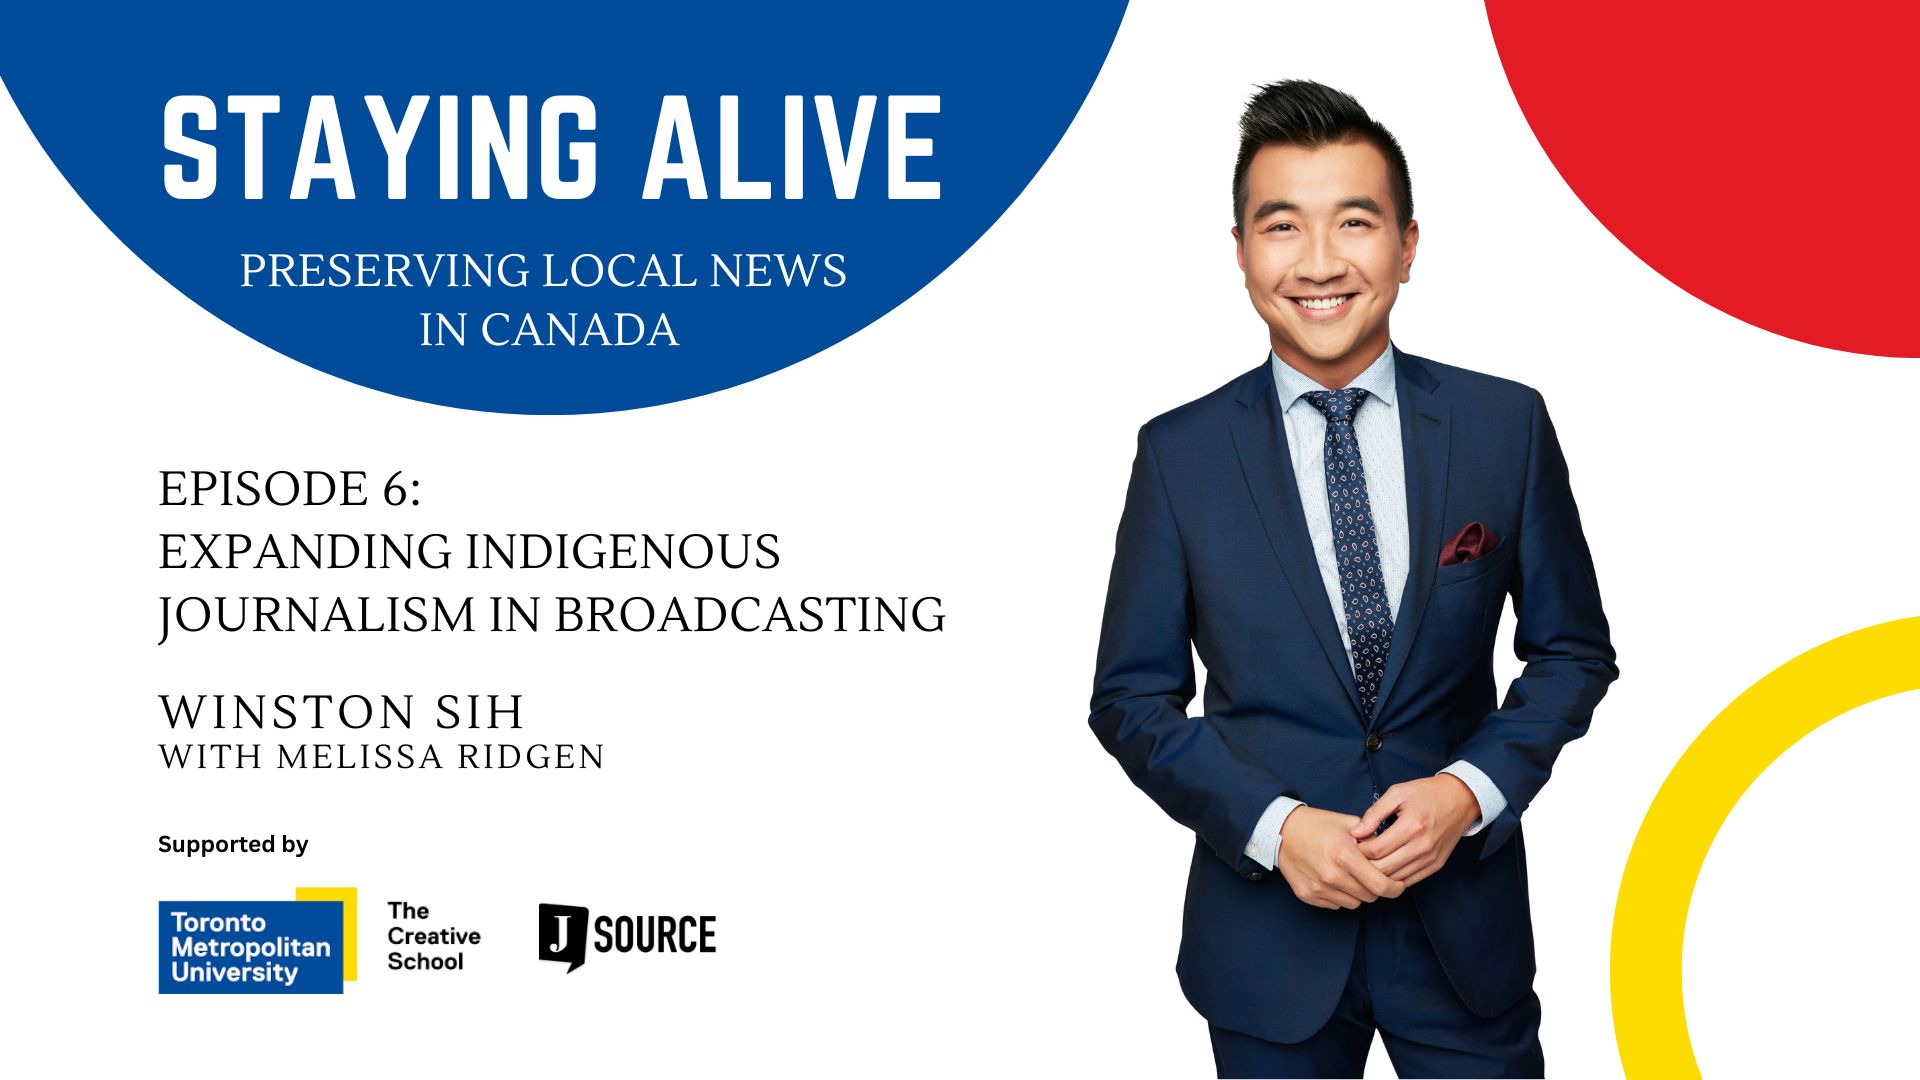 Staying Alive Preserving Local News in Canada Episode 6 Expanding Indigenous Journalism in Broadcasting Winston Sih with Melissa Ridgen Supported by the Creative School at Toronto Metropolitan University and J-Source